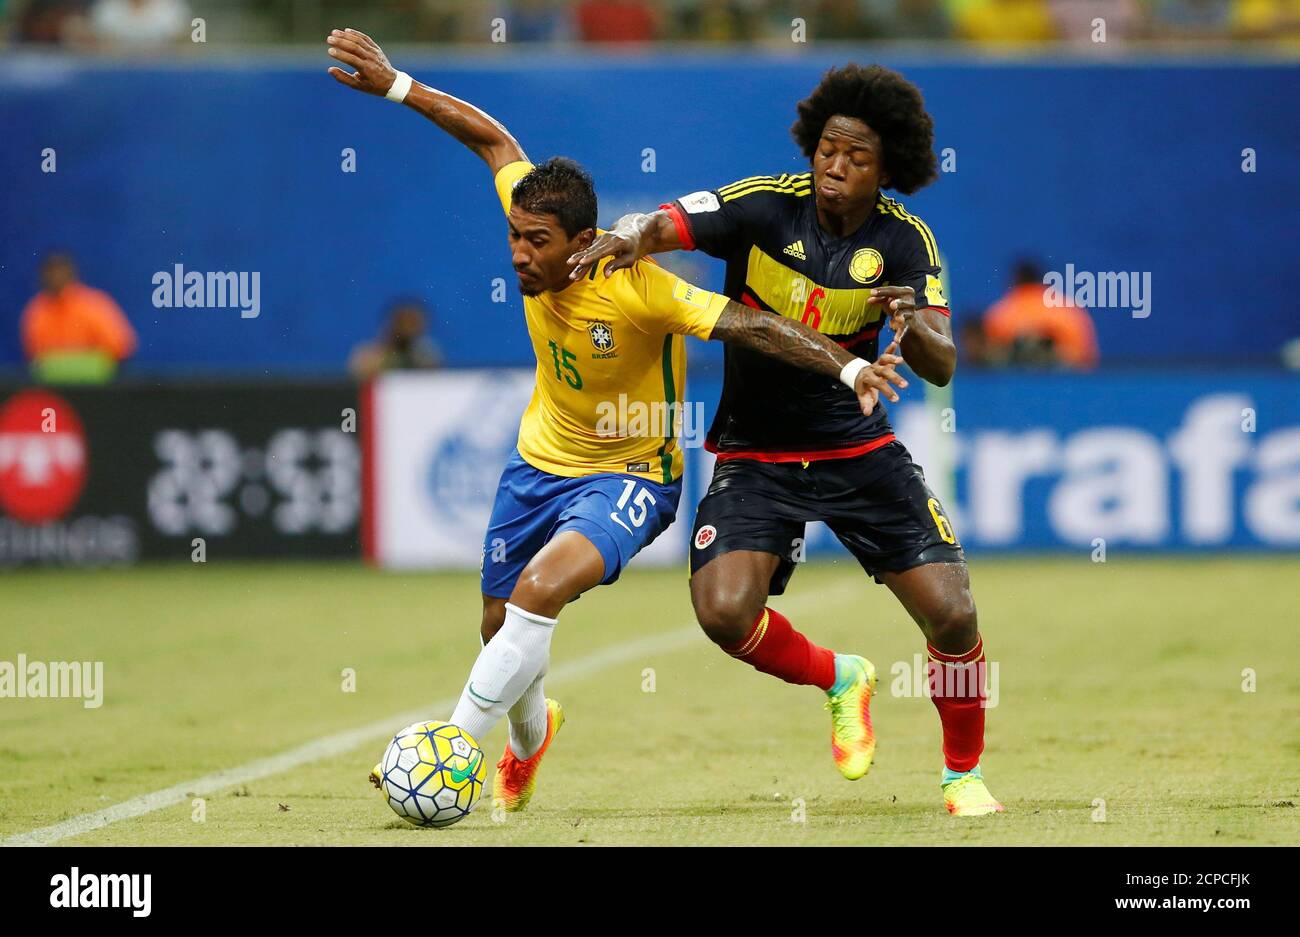 Football Soccer - World Cup 2018 Qualifiers - Brazil v Colombia - Amazonia Arena Stadium, Manaus, Brazil - 6/9/16. Paulinho (L) of Brazil in action with Carlos Sanchez of Colombia.   REUTERS/Bruno Kelly Stock Photo